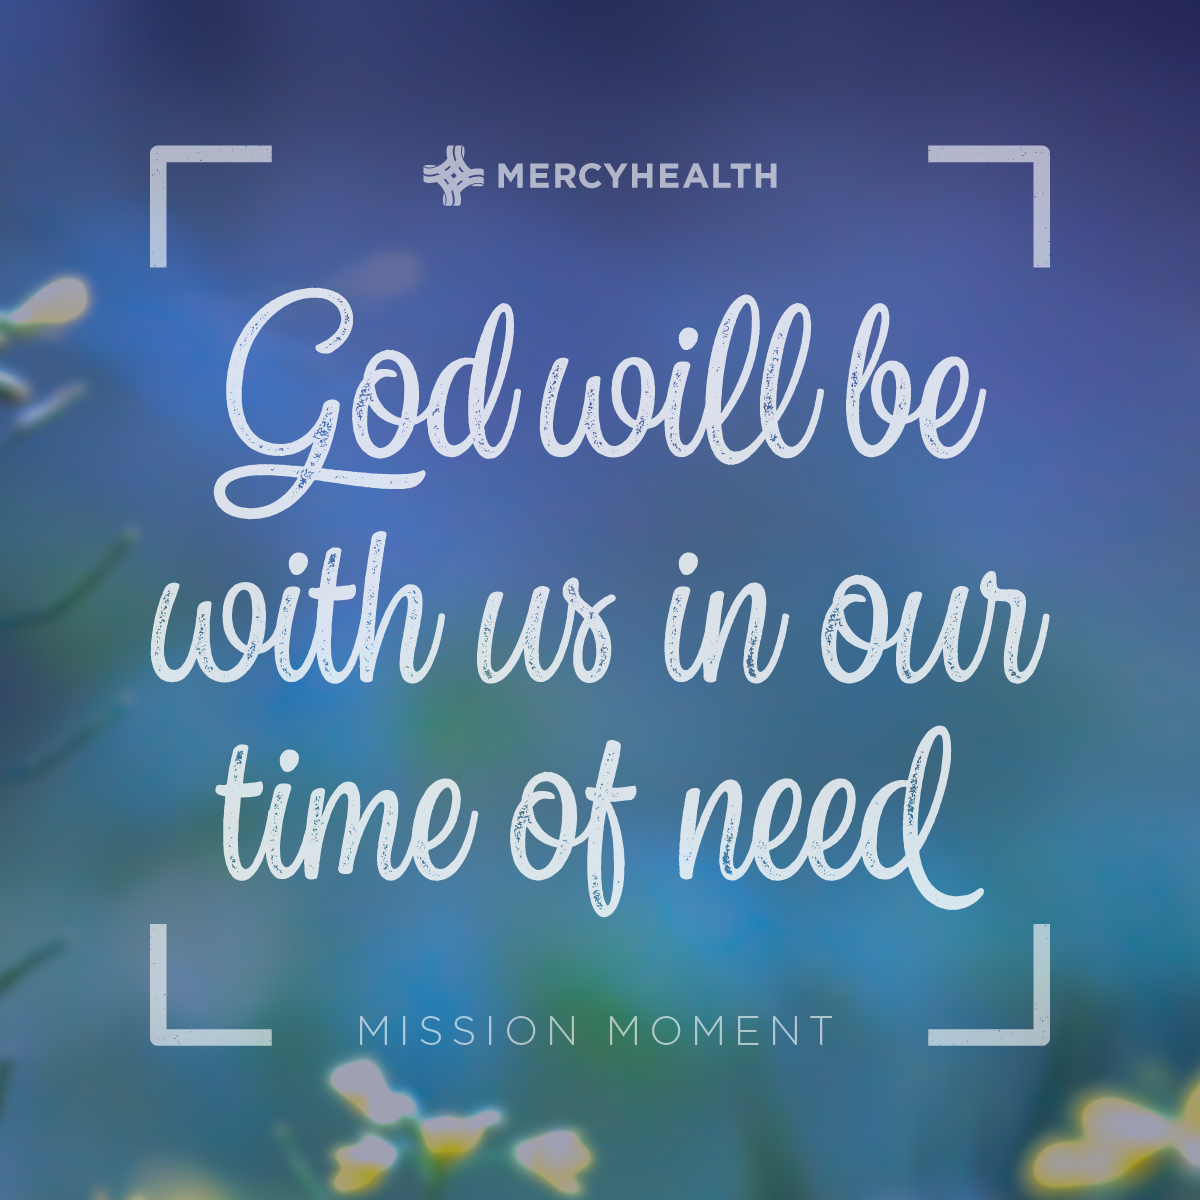 In this “Mission Moment,” we’re reminded that in times of need and in times of distress, God has given us this promise that He will be with us, and He is faithful to keep His promises. #MissionMoments #Observances